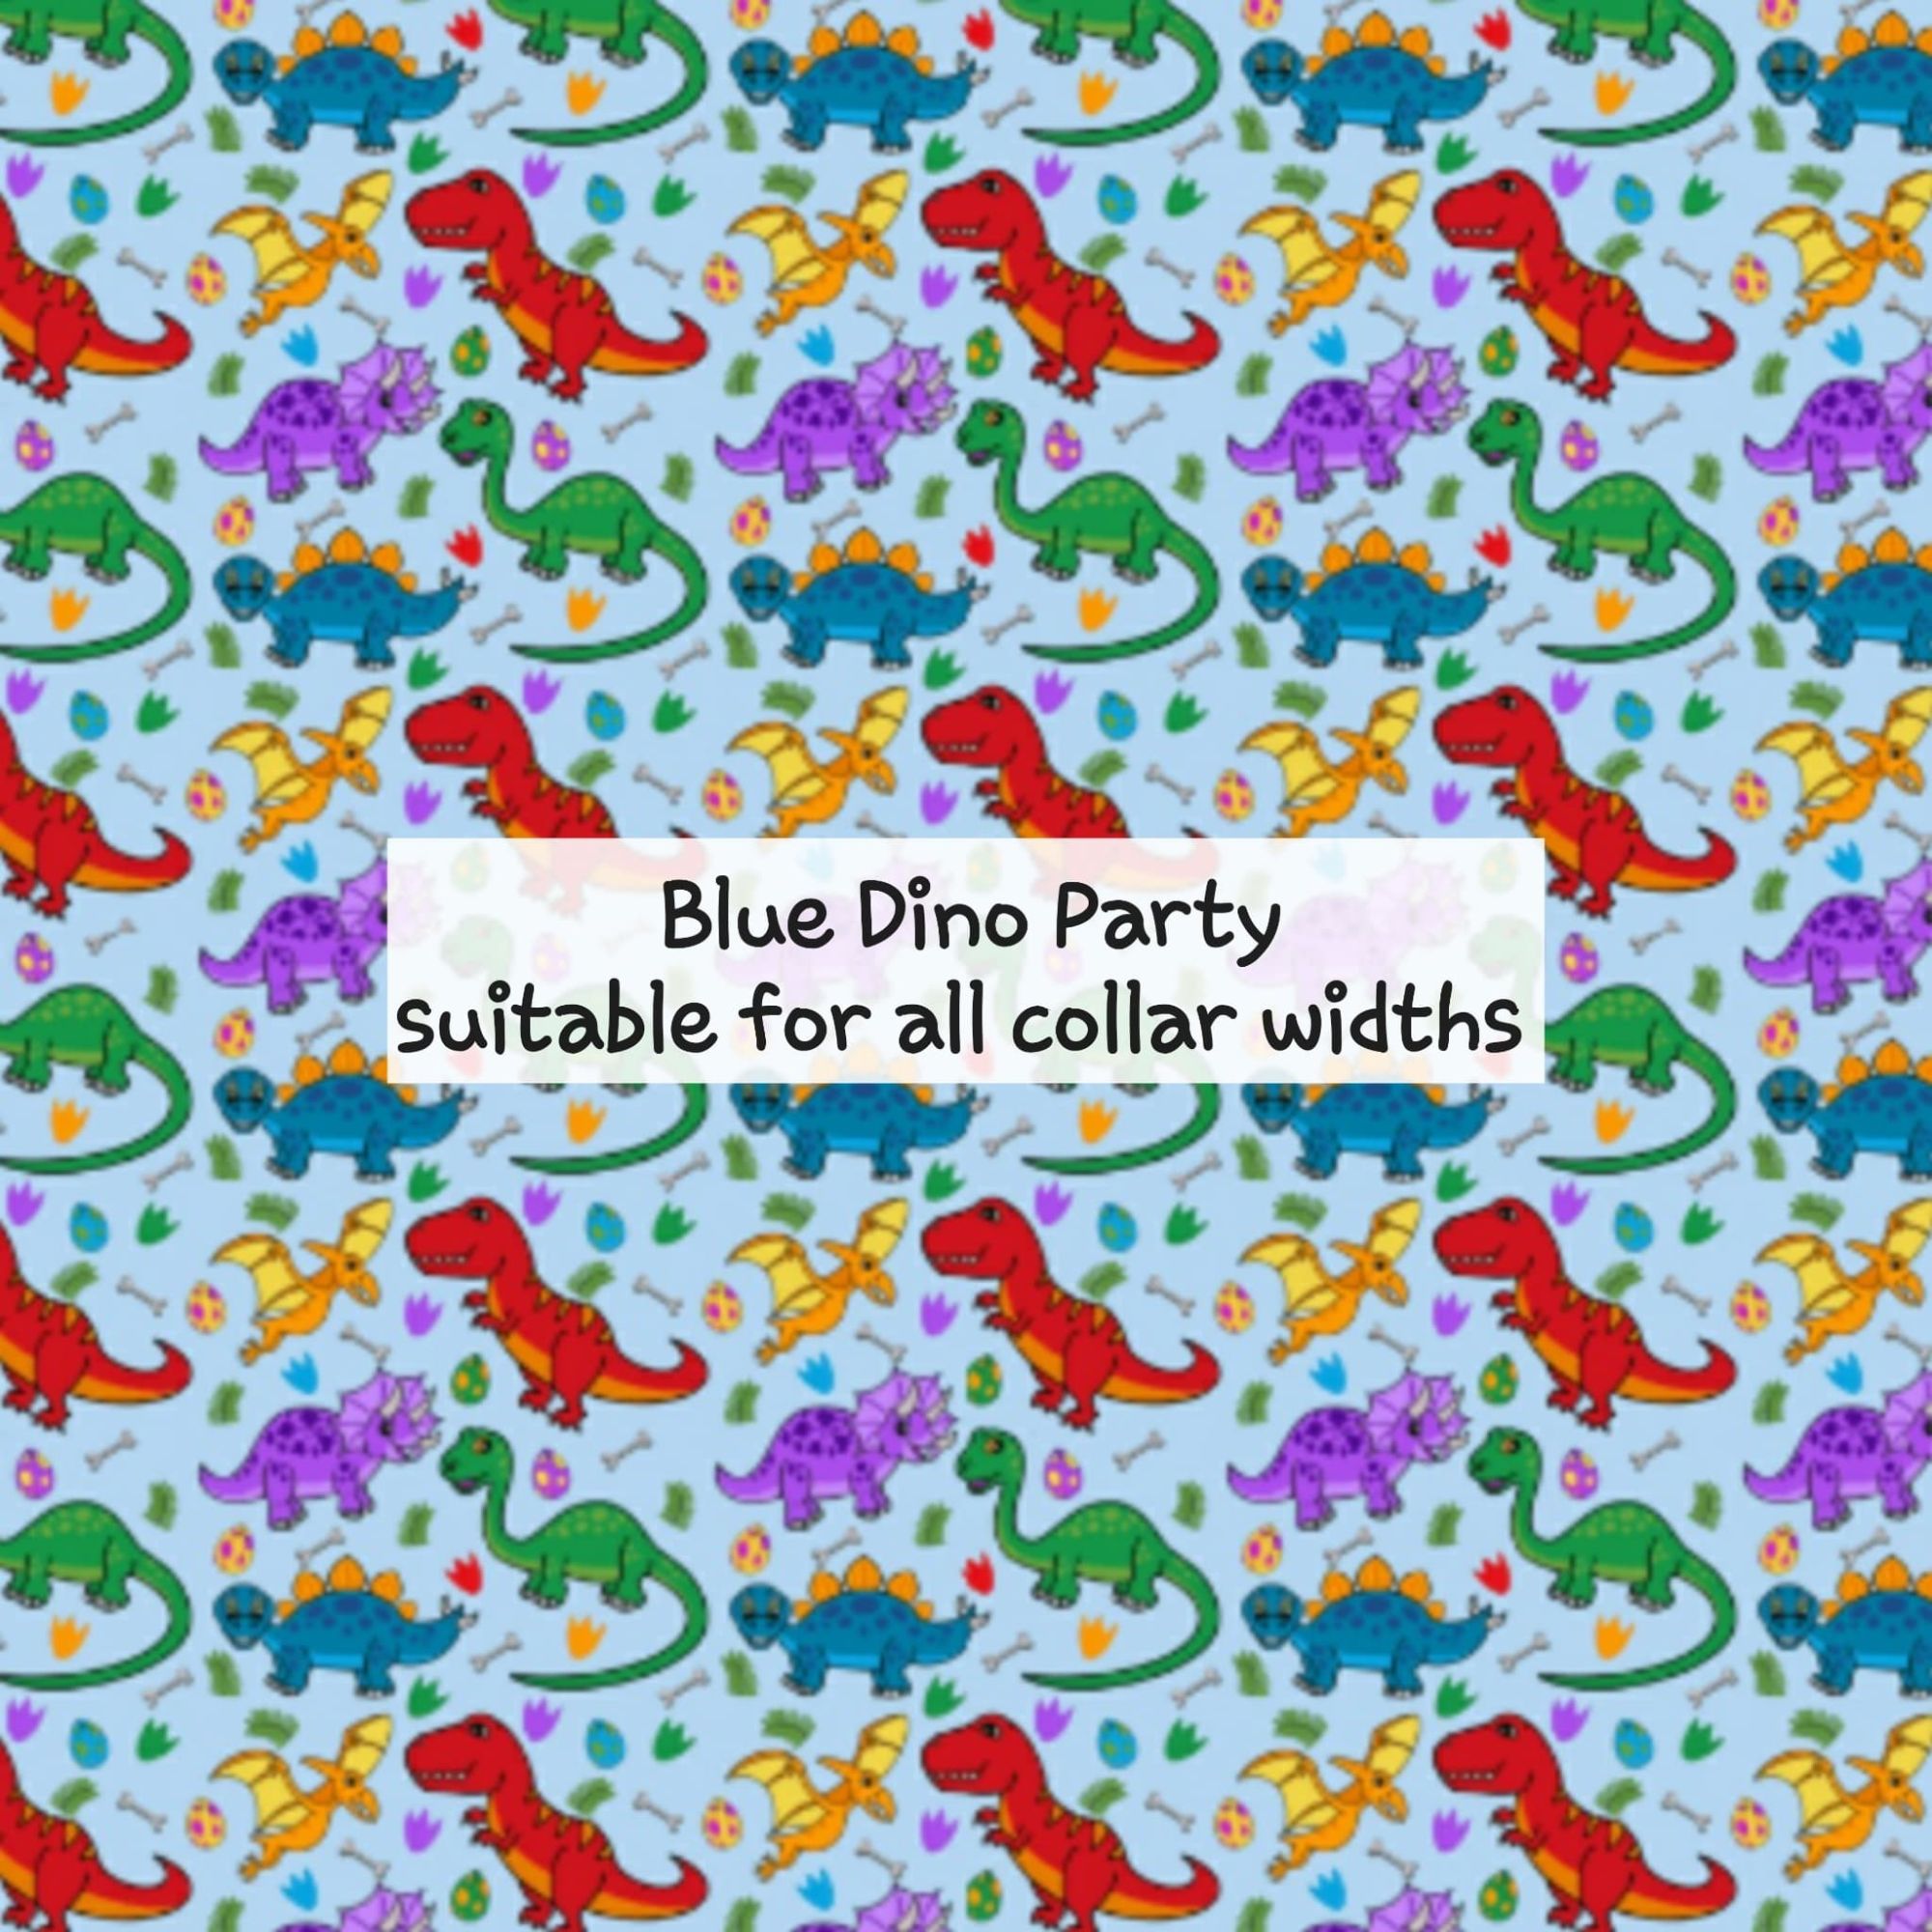 Blue Dino Party